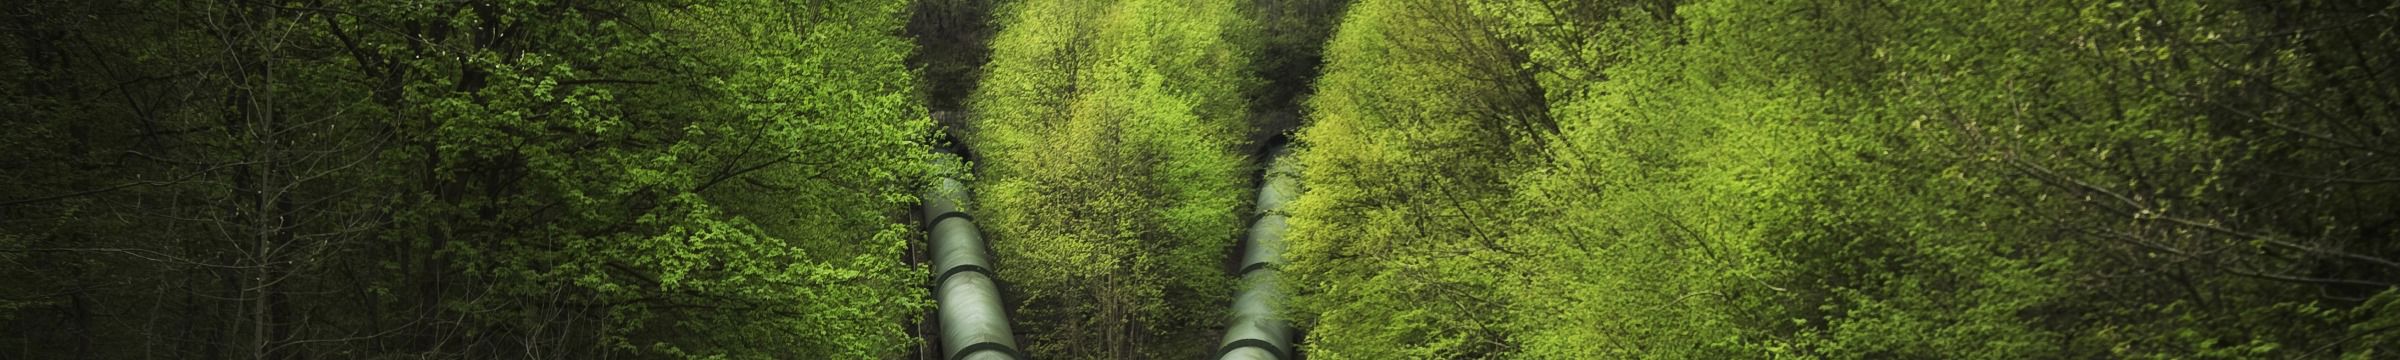 Hydro power pipes in woods